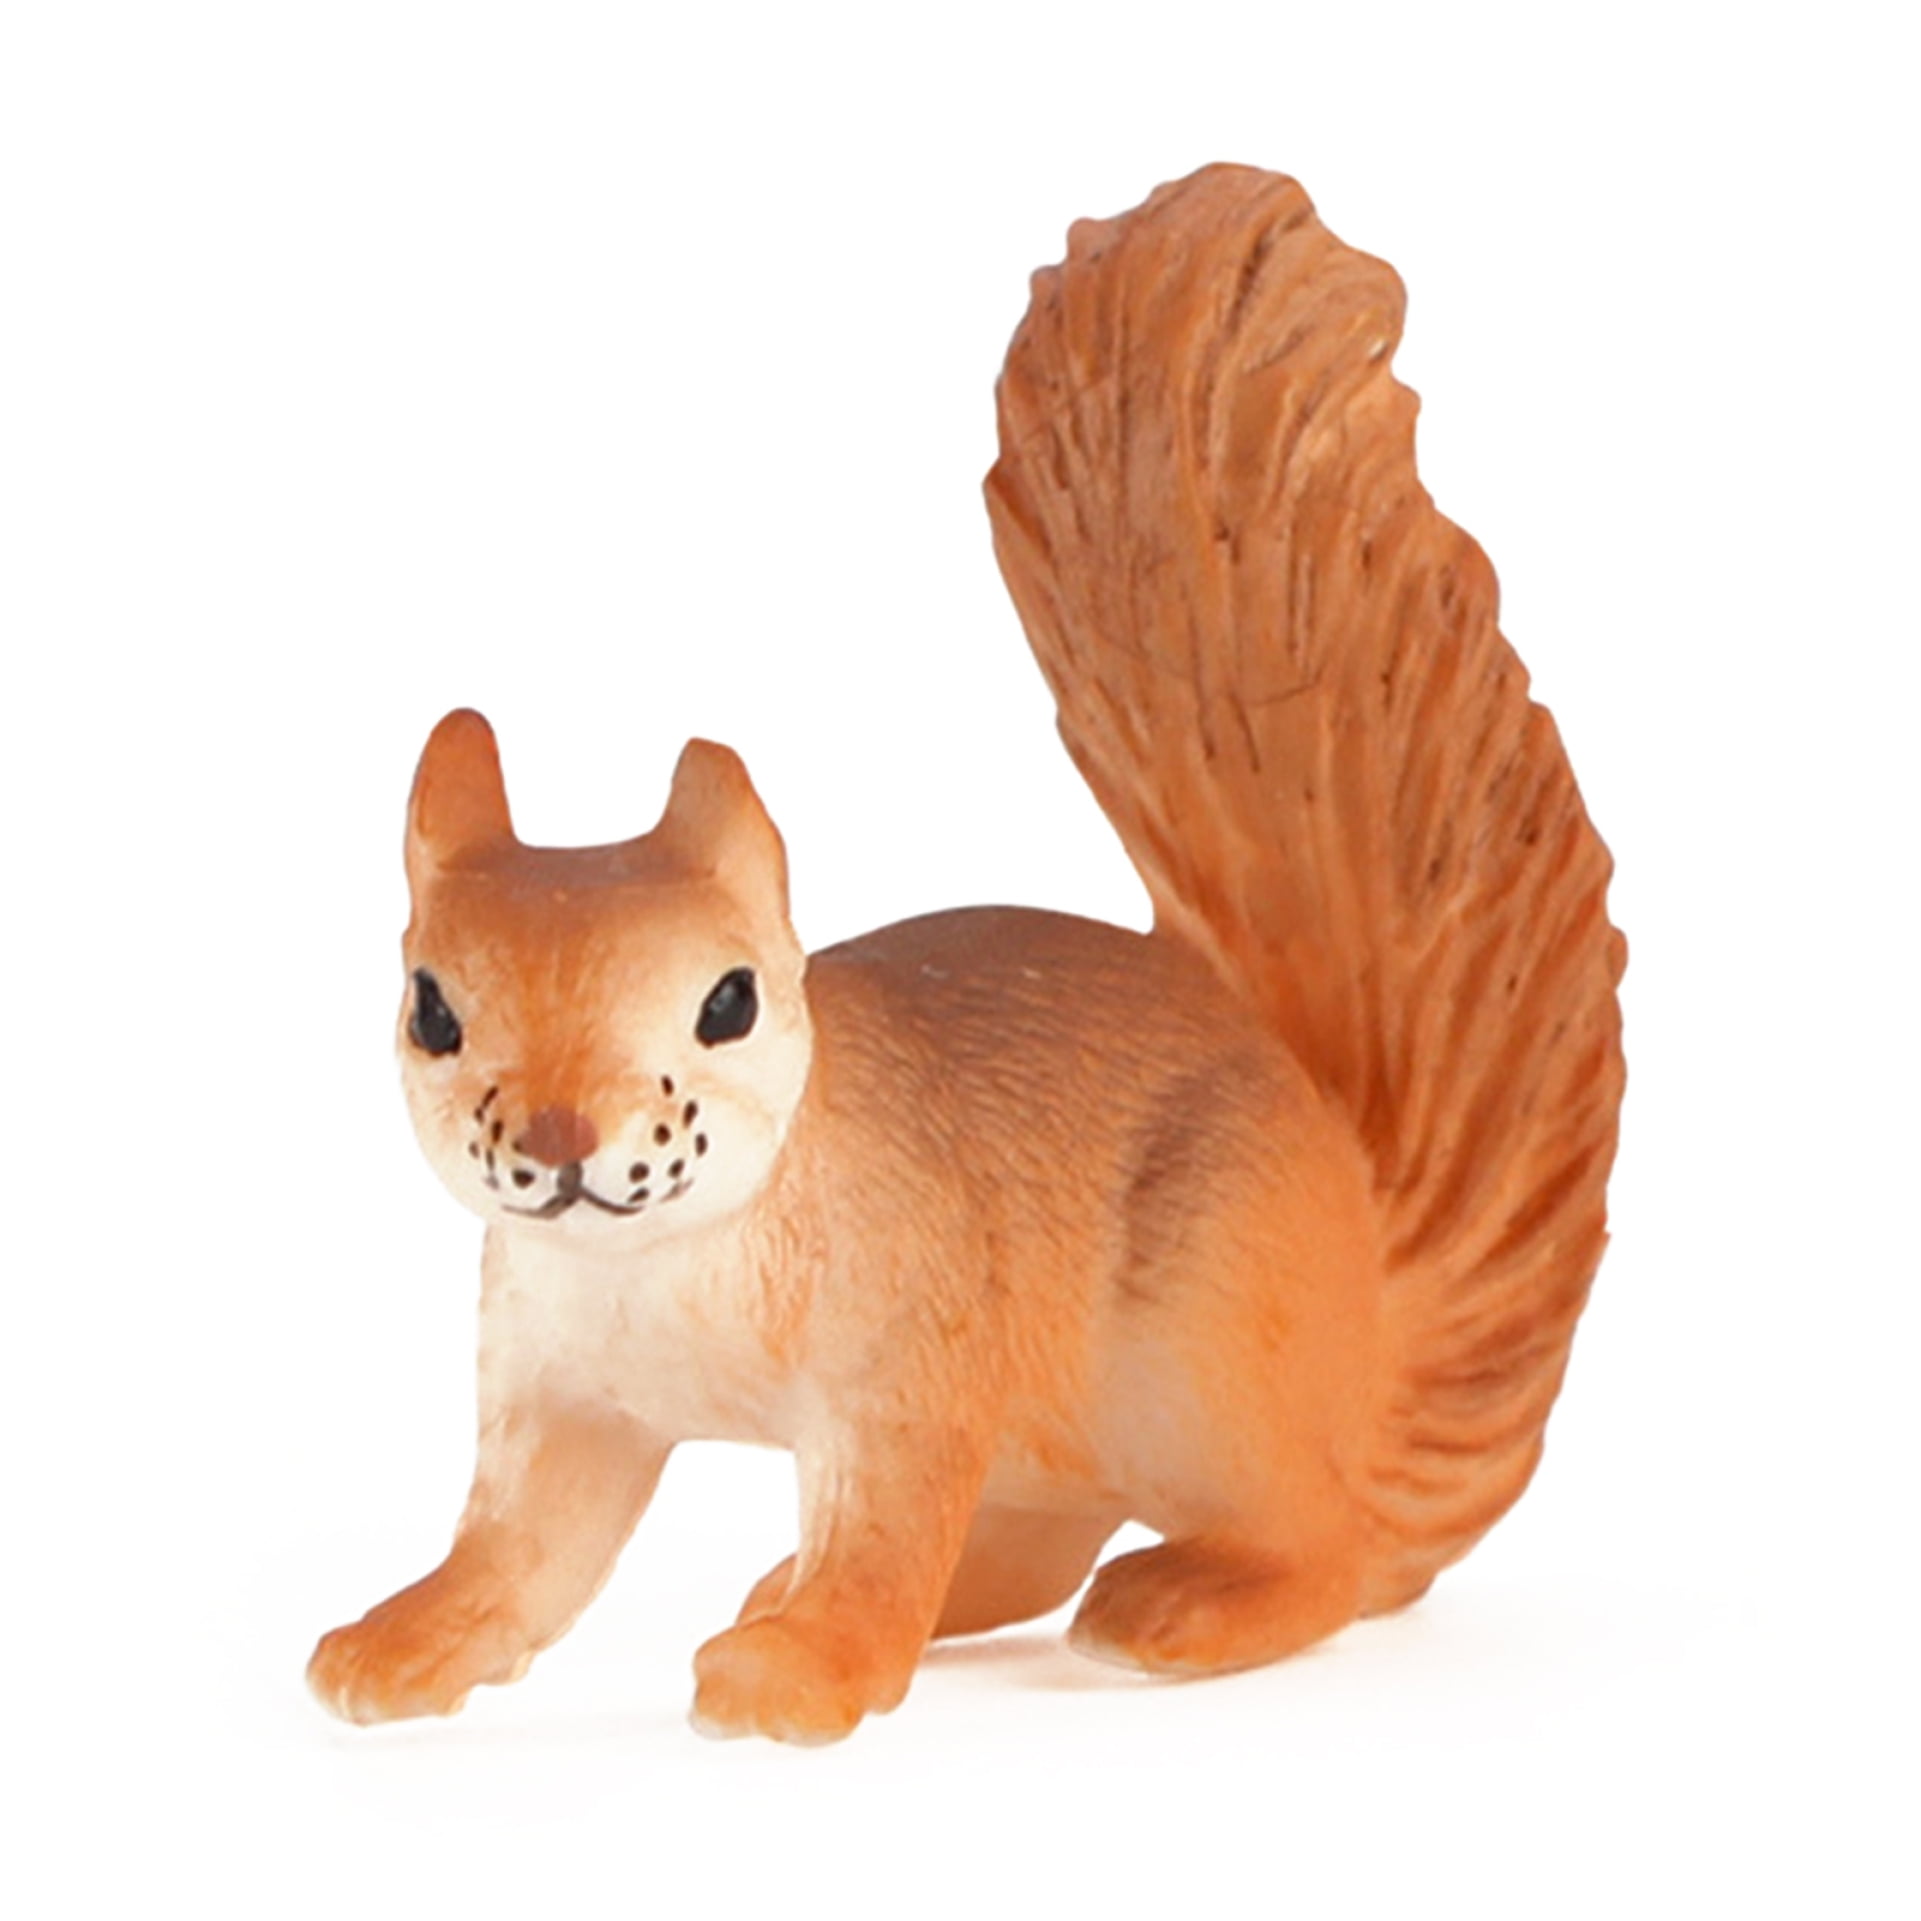 Cake Topper TangTanger 8 pcs Cute Squirrel Animal Characters Toys Figurines Playset Home Garden Cake Decoration 